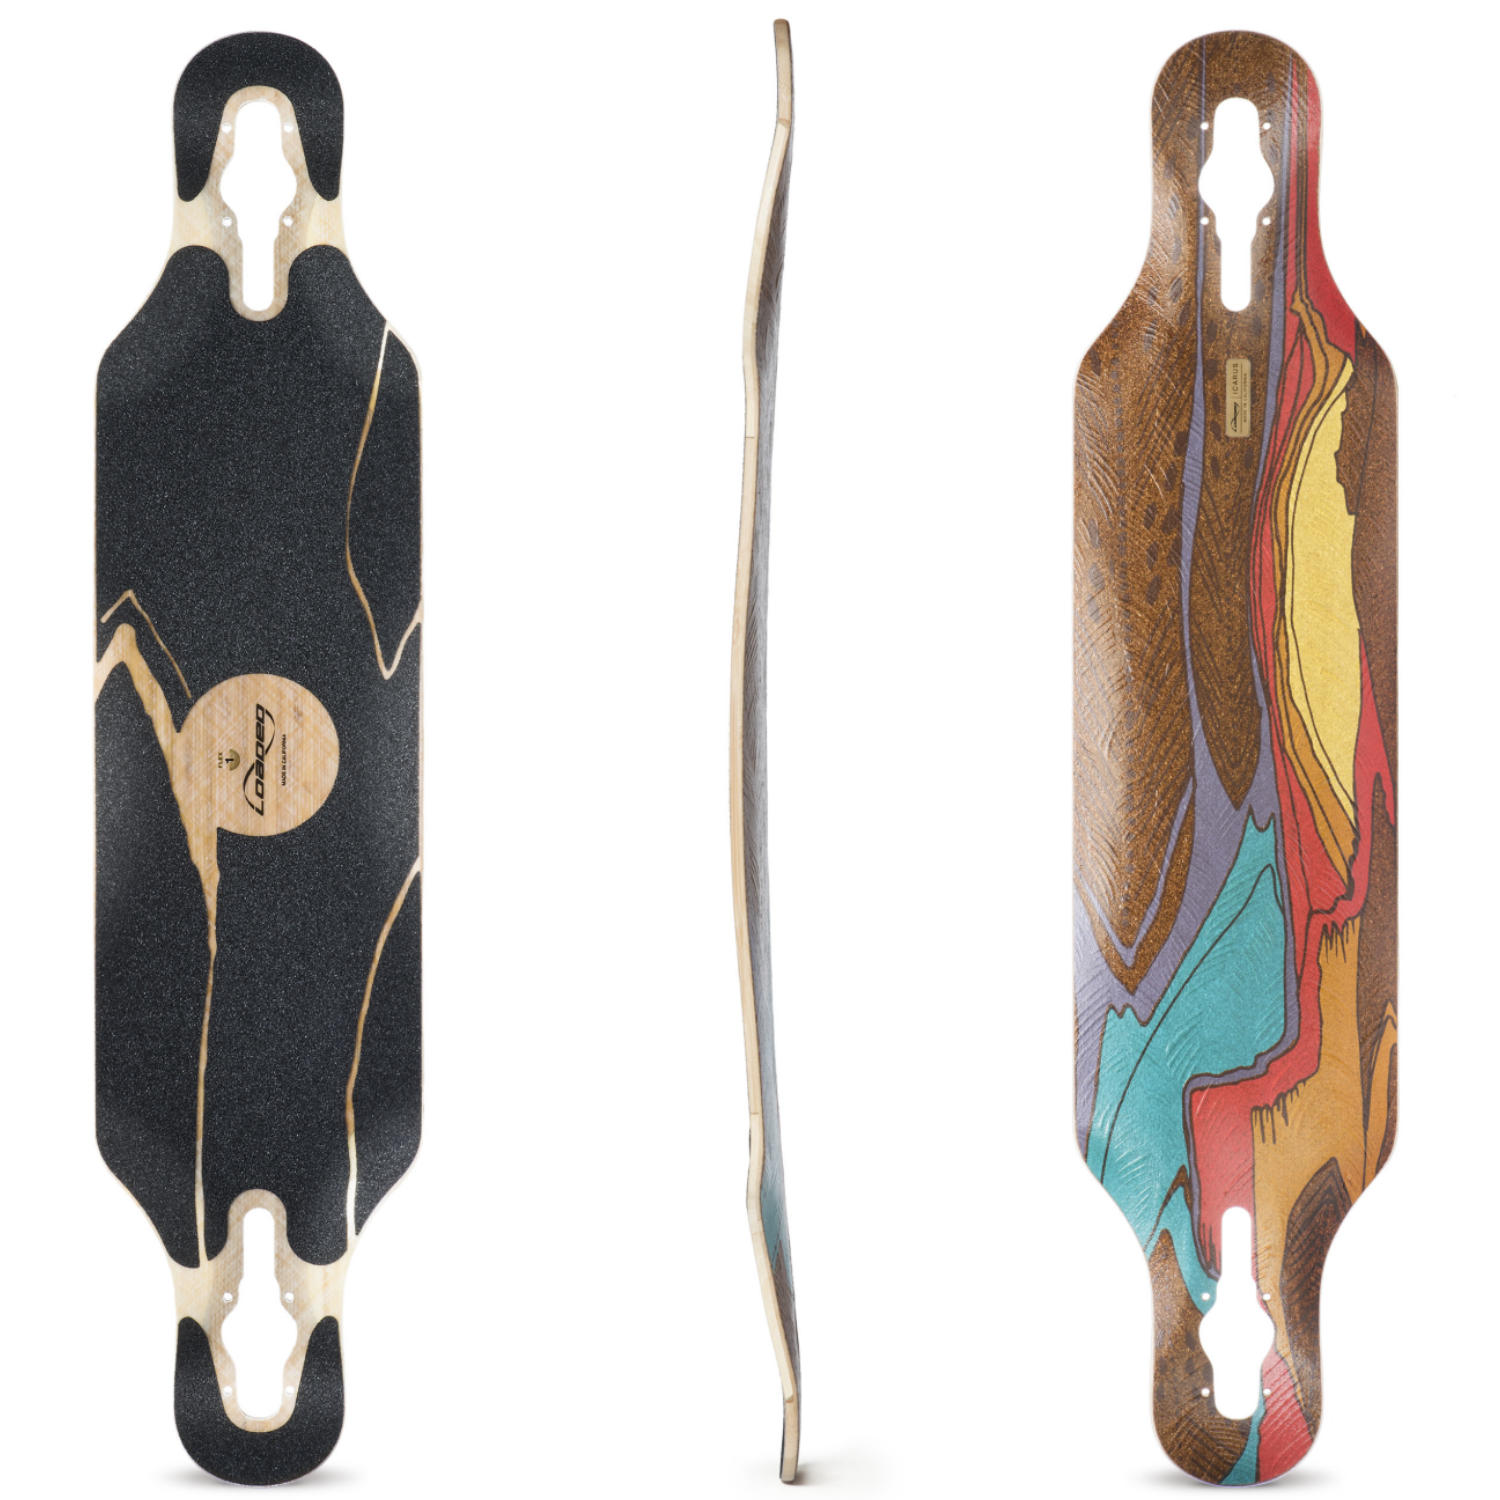 Loaded Boards Icarus Longboard, Deck and Complete